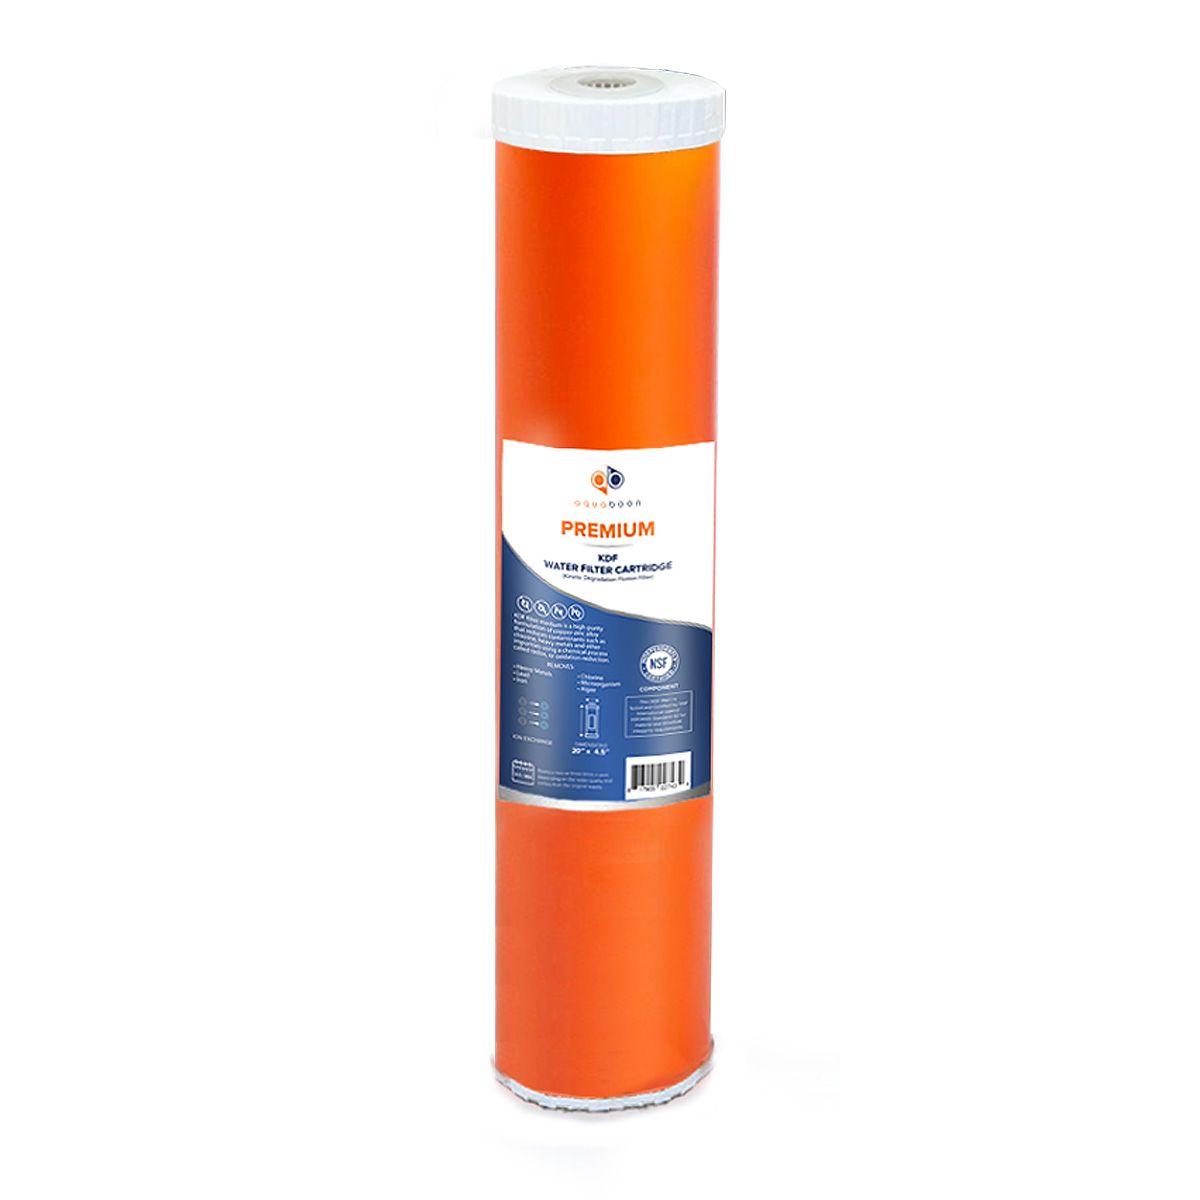 Whole House KDF 20 x 4.5 Inch. Big Blue Replacement Water Filter Cartridge